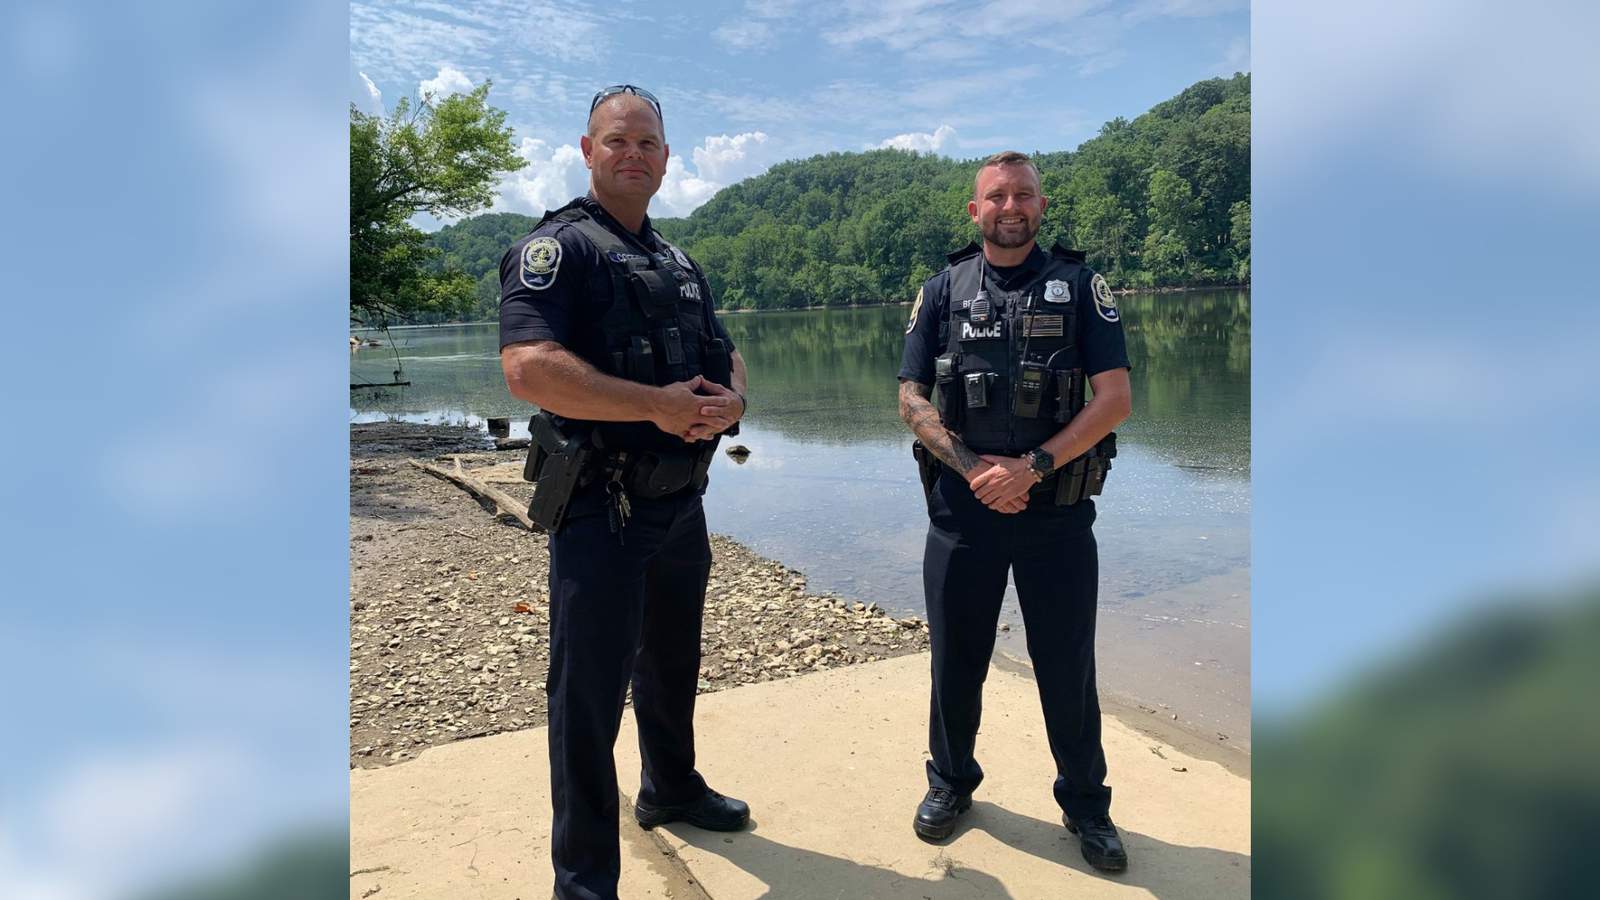 Radford officers rescue tuber from New River